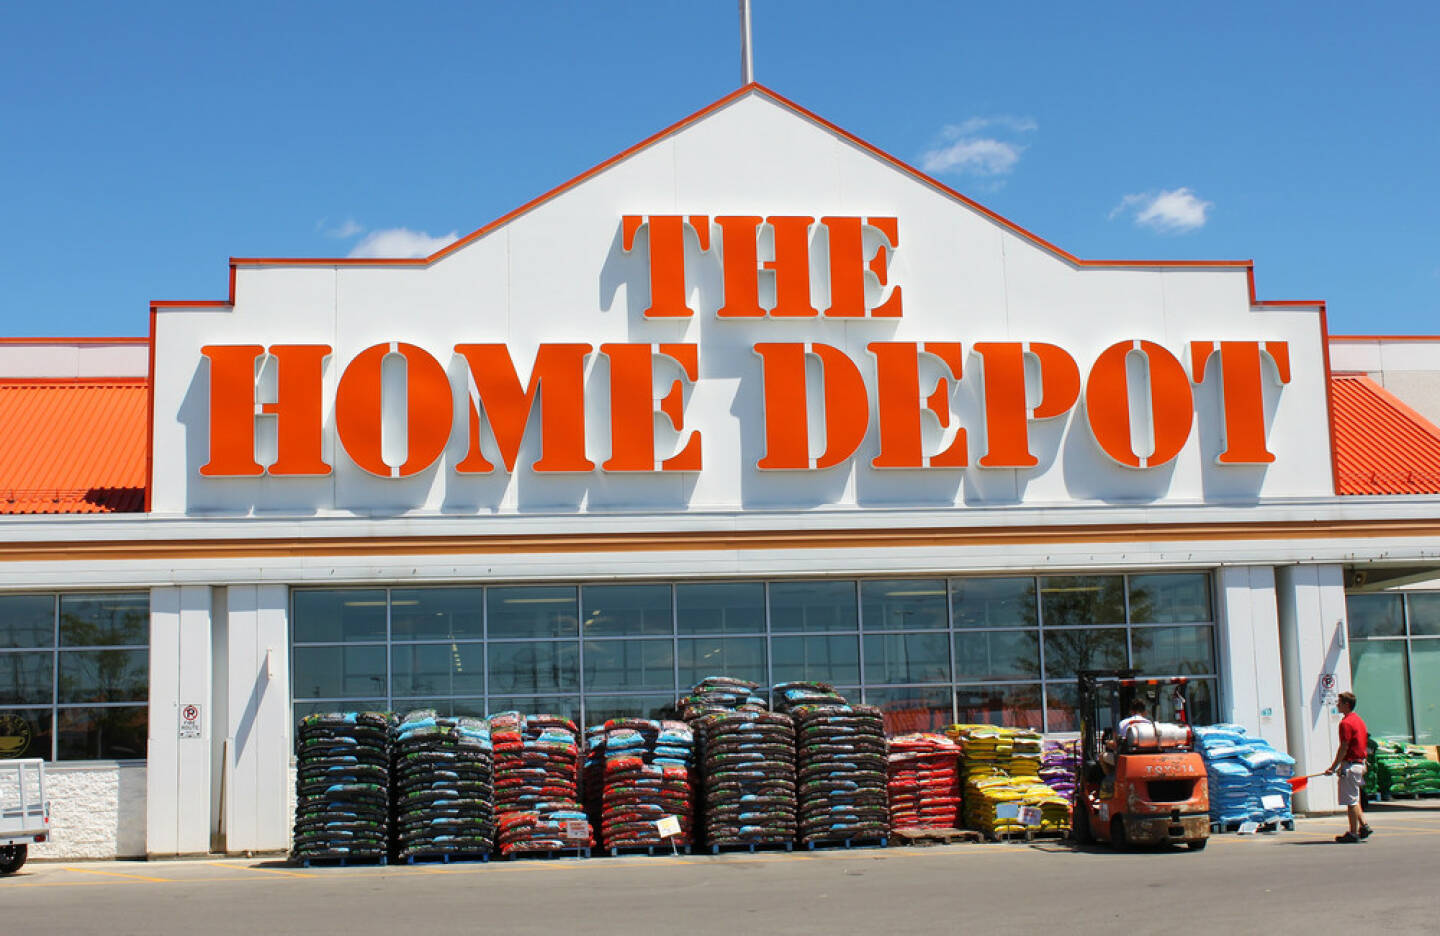 The Home Depot, <a href=http://www.shutterstock.com/gallery-1409053p1.html?cr=00&pl=edit-00>Niloo</a> / <a href=http://www.shutterstock.com/?cr=00&pl=edit-00>Shutterstock.com</a> , Niloo / Shutterstock.com